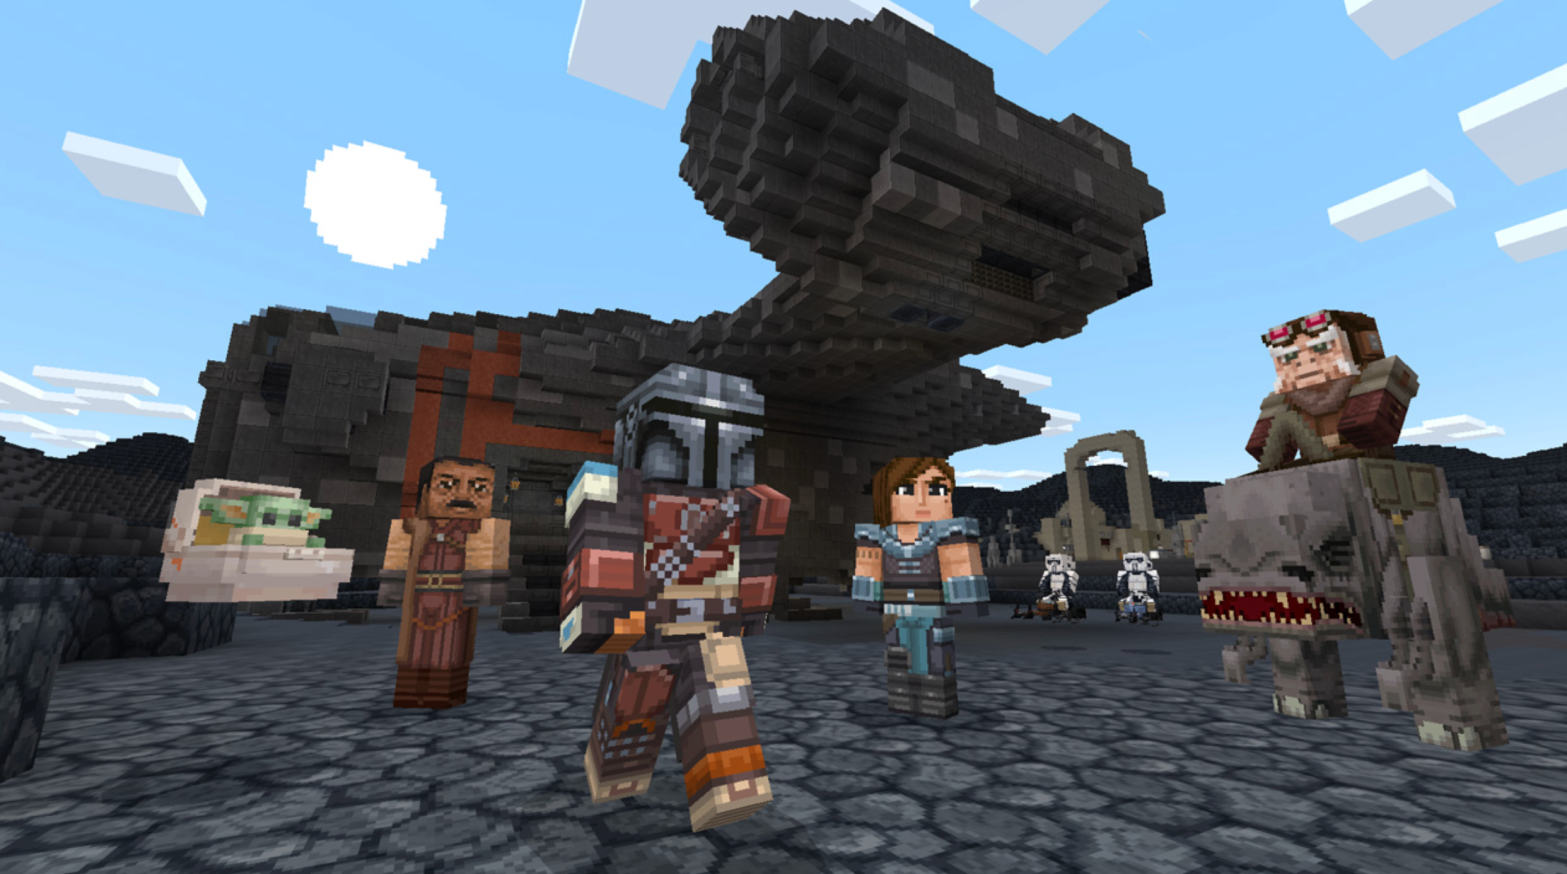 Even in block form, the Child is adorable.  (Image: Mojang Studios)